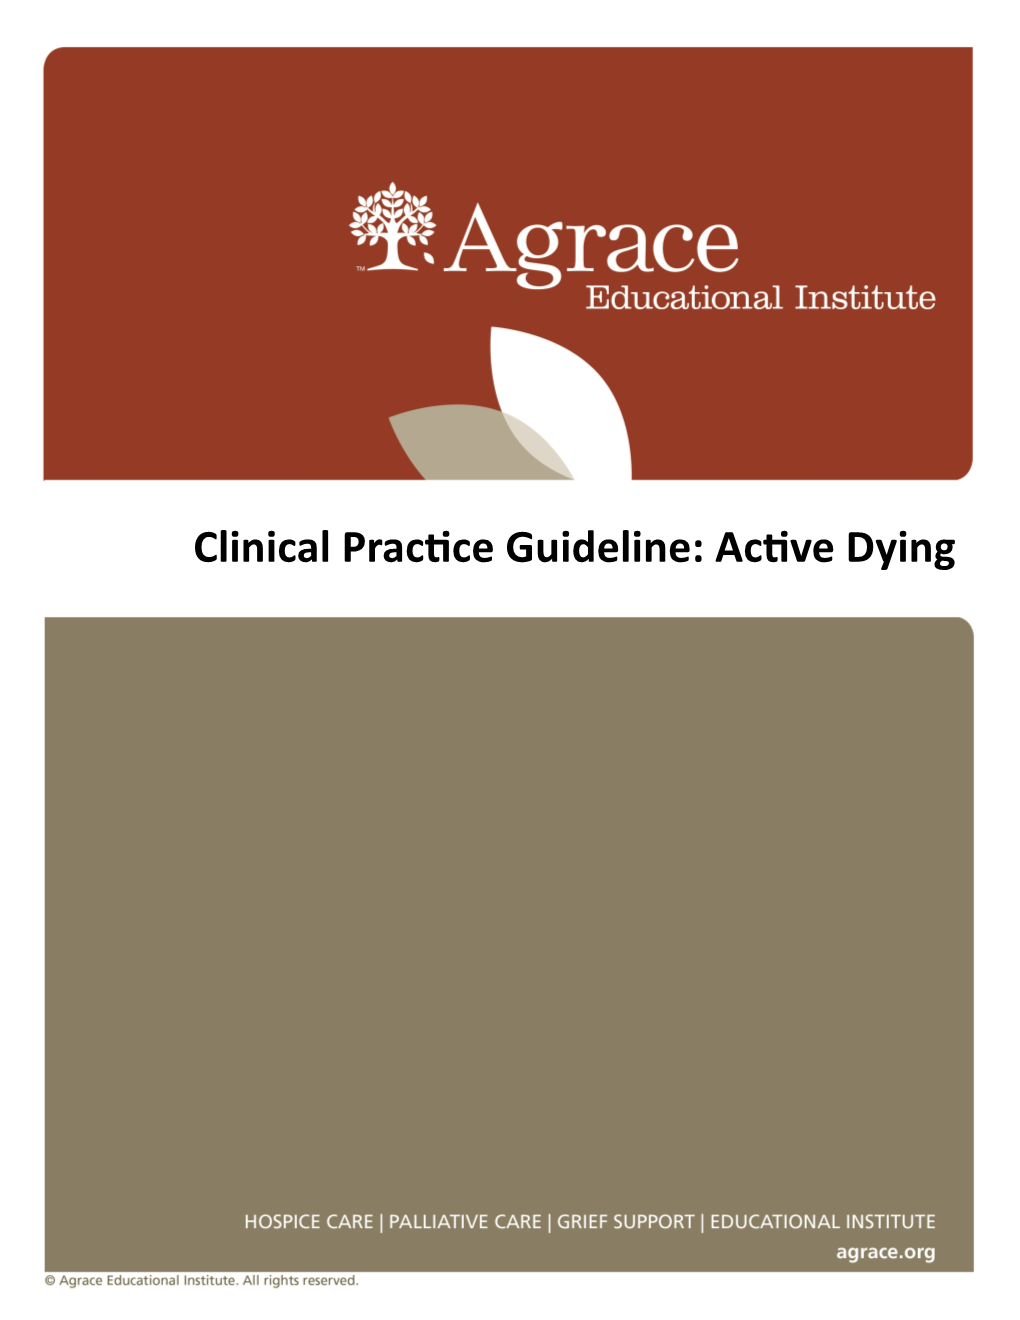 Active Dying